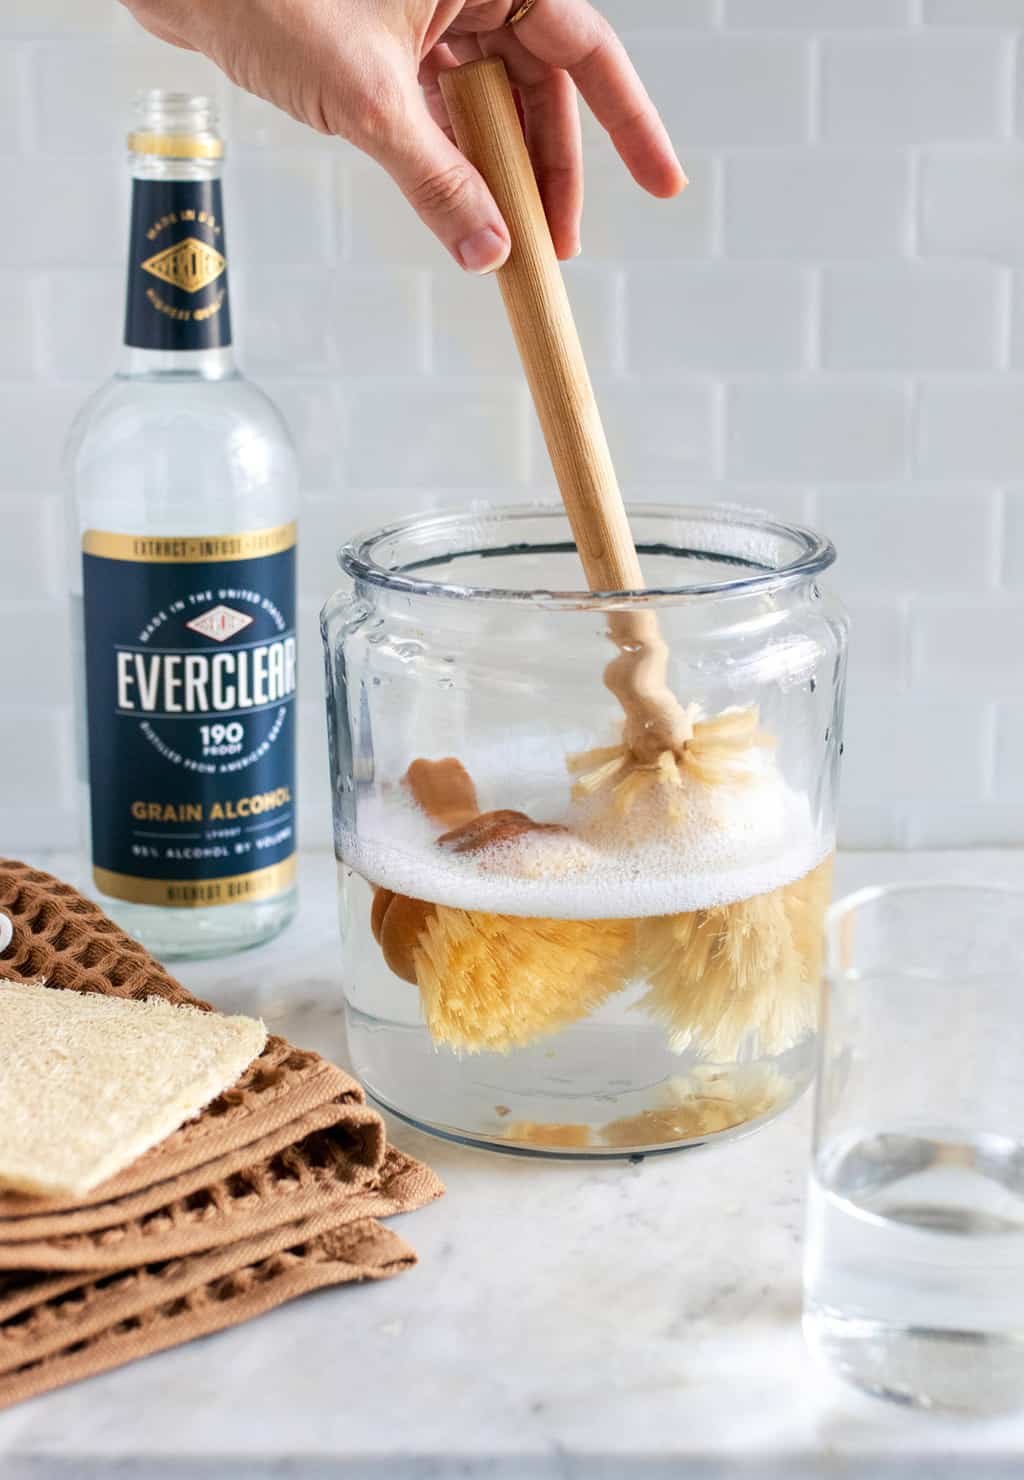 How to clean sponges and brushes with Everclear